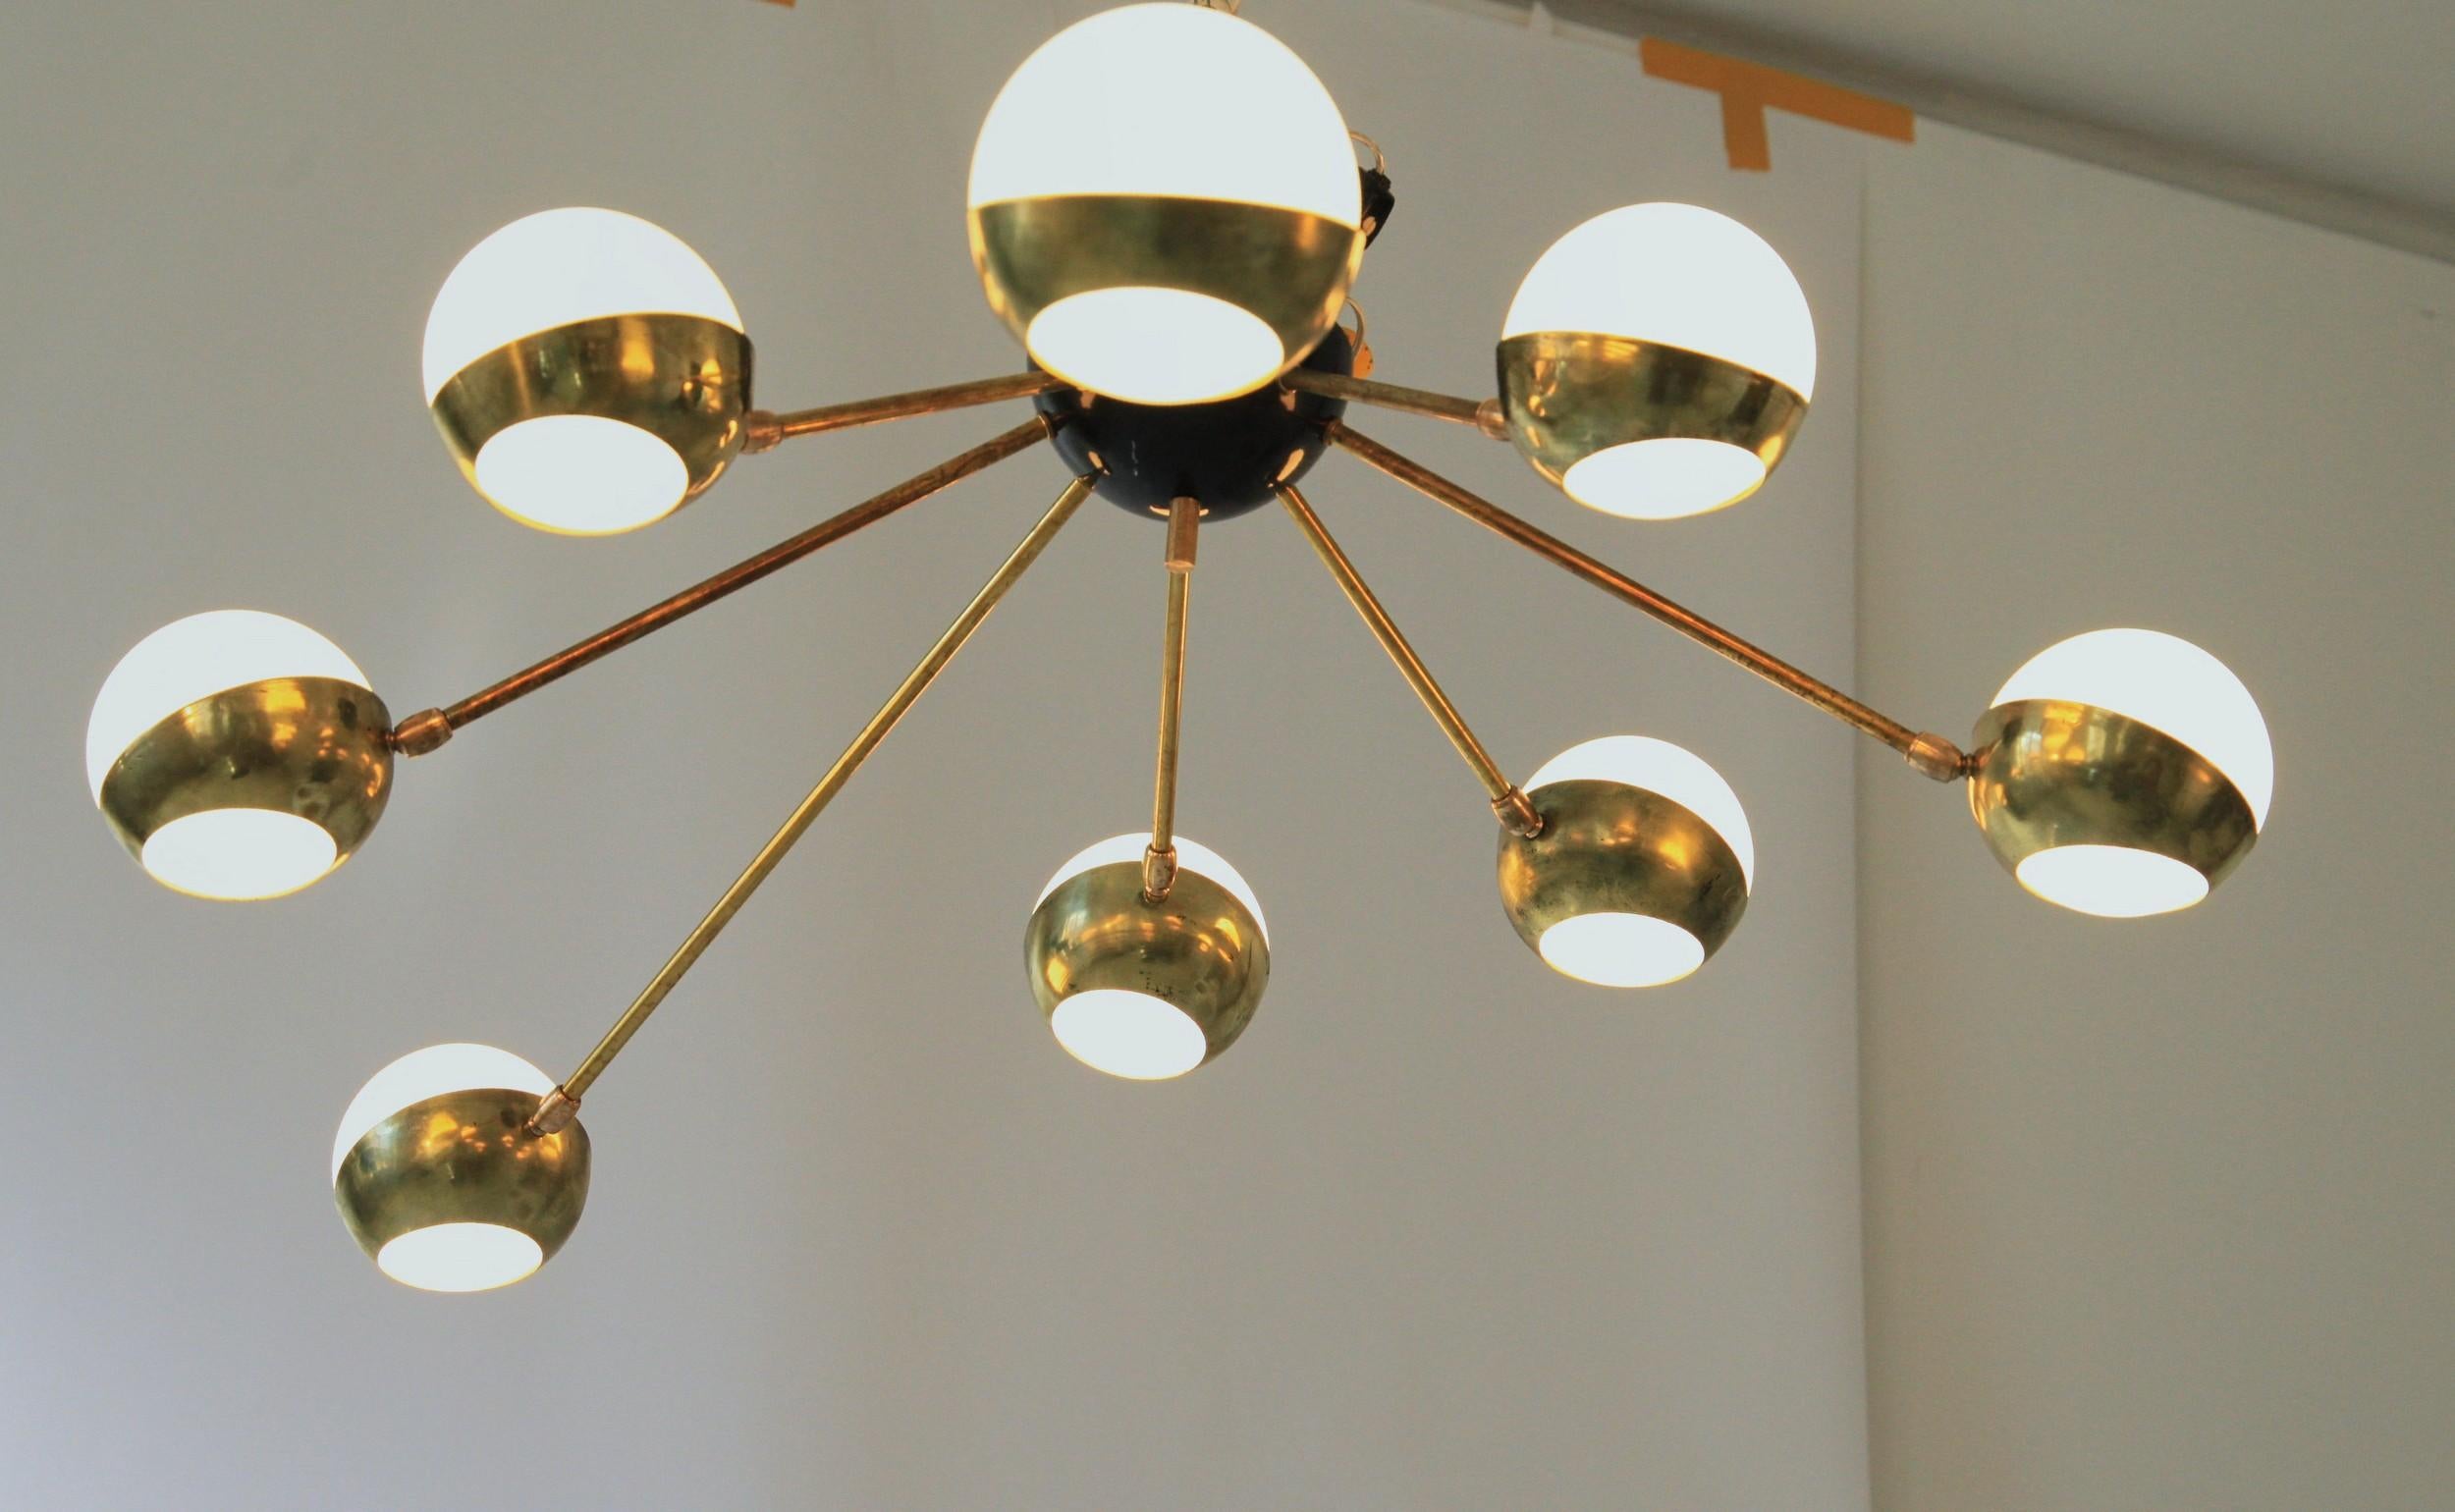 Metal Nido, Flush Mount Brass and Glass Chandelier 8 Arms, Low Ceiling Best, Free Ship For Sale